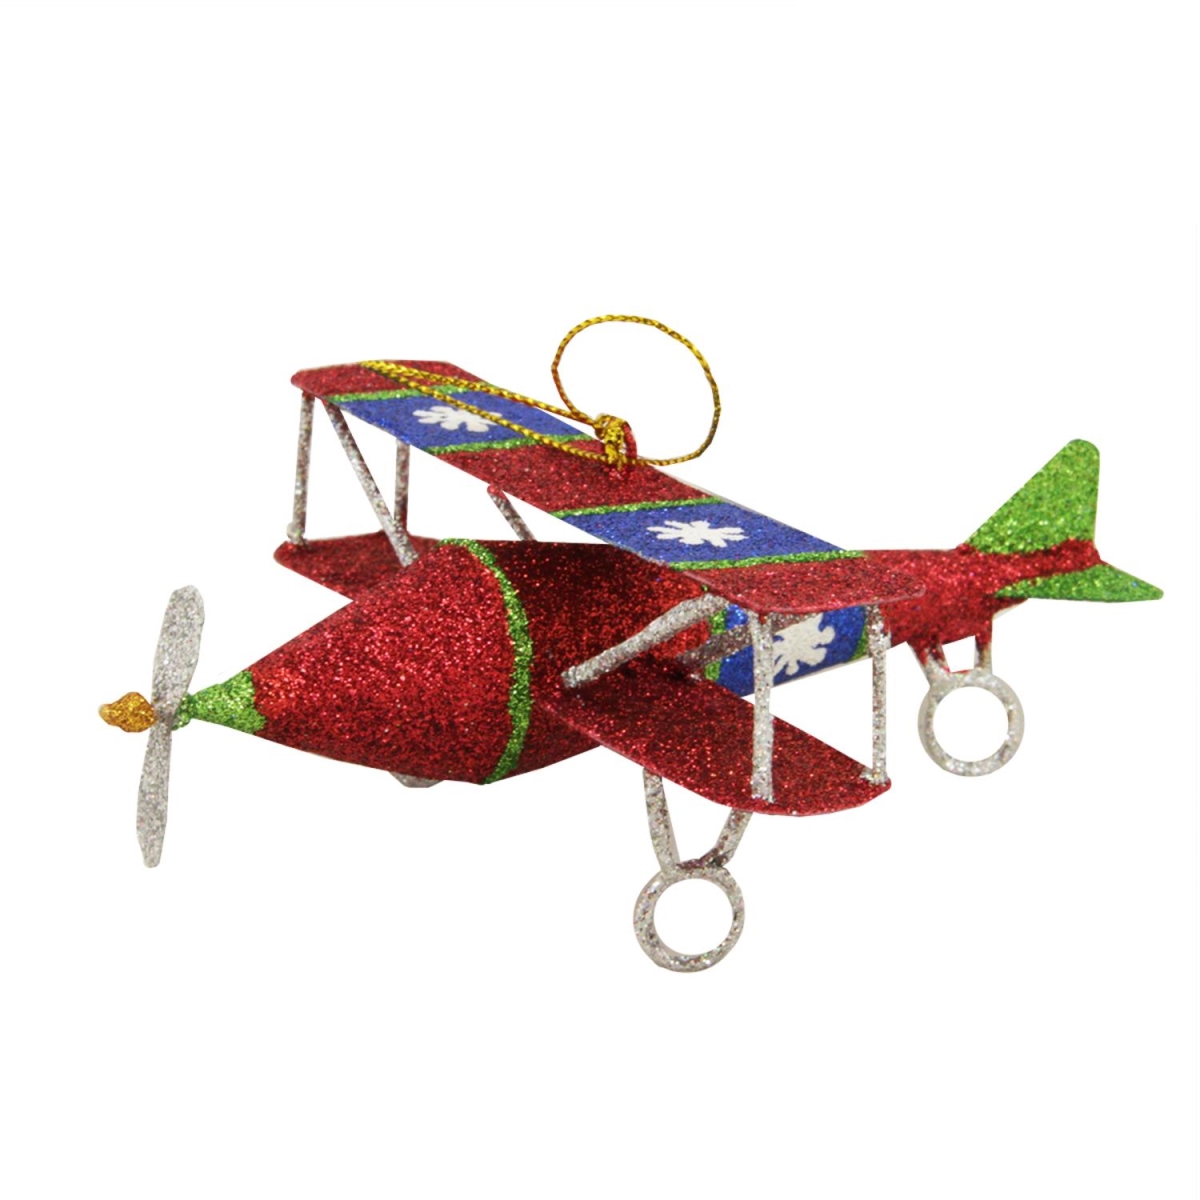 31104256 5 In. Glitter Drenched Snowflake Accented Biplane Christmas Ornament